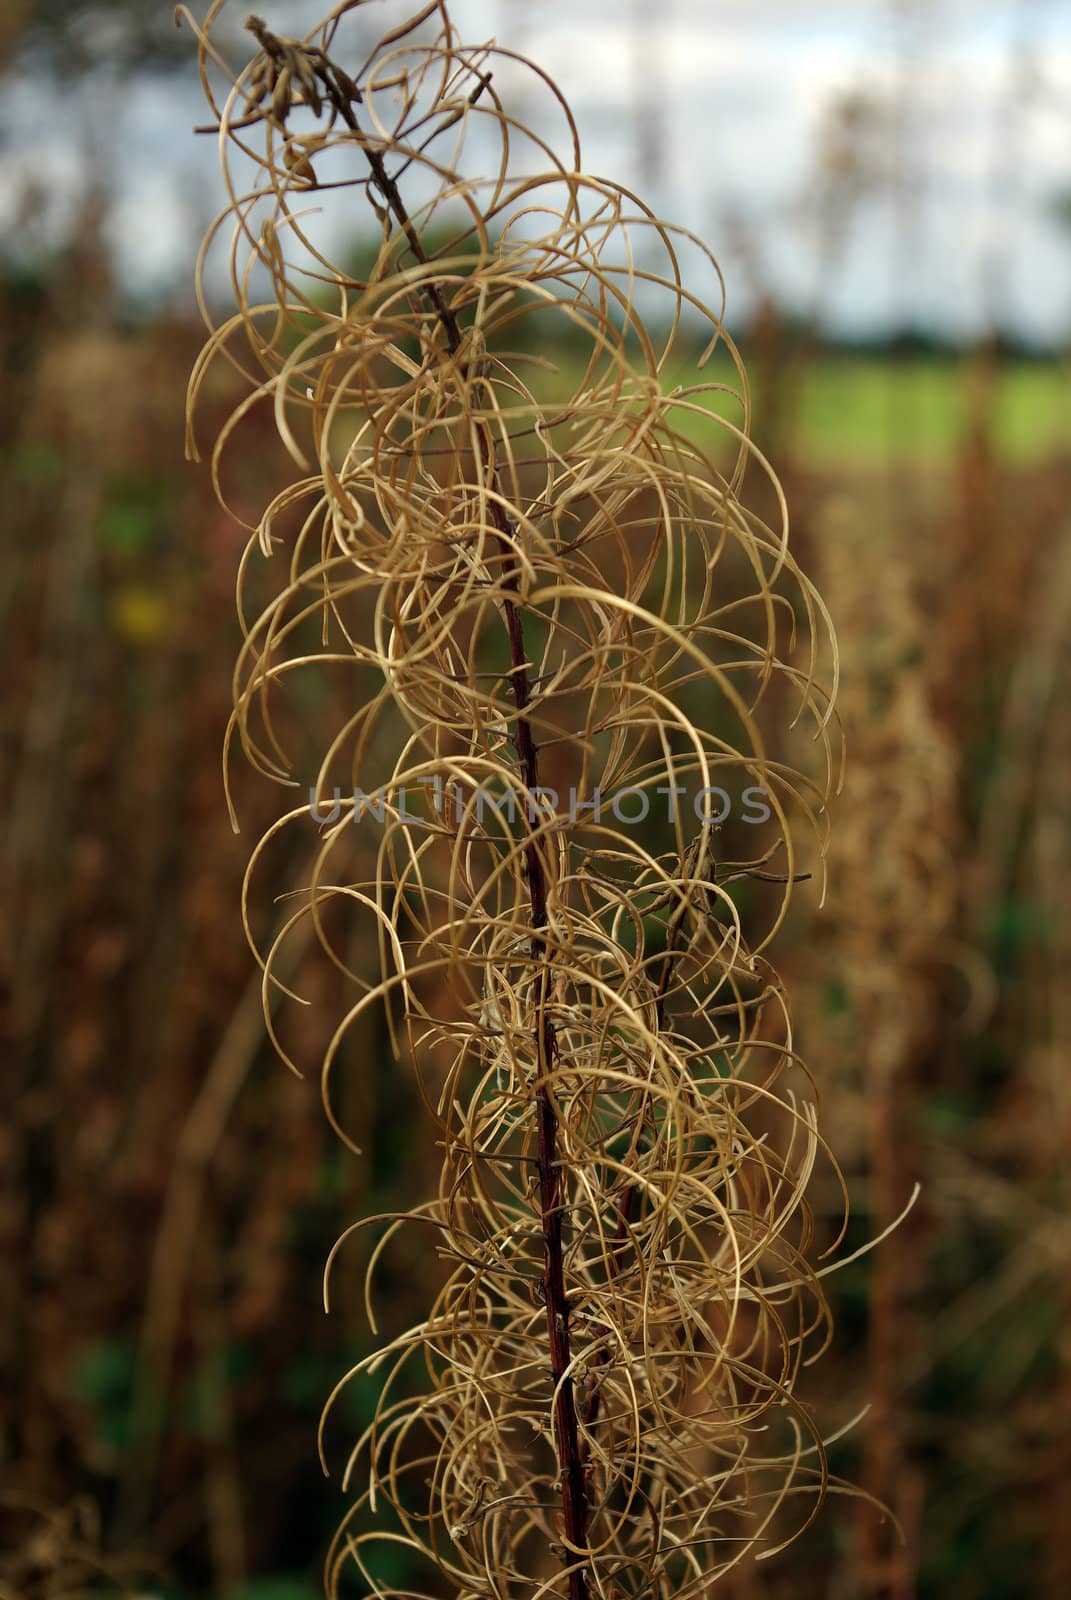 Spiralling plant growing in hedgerow in autumn